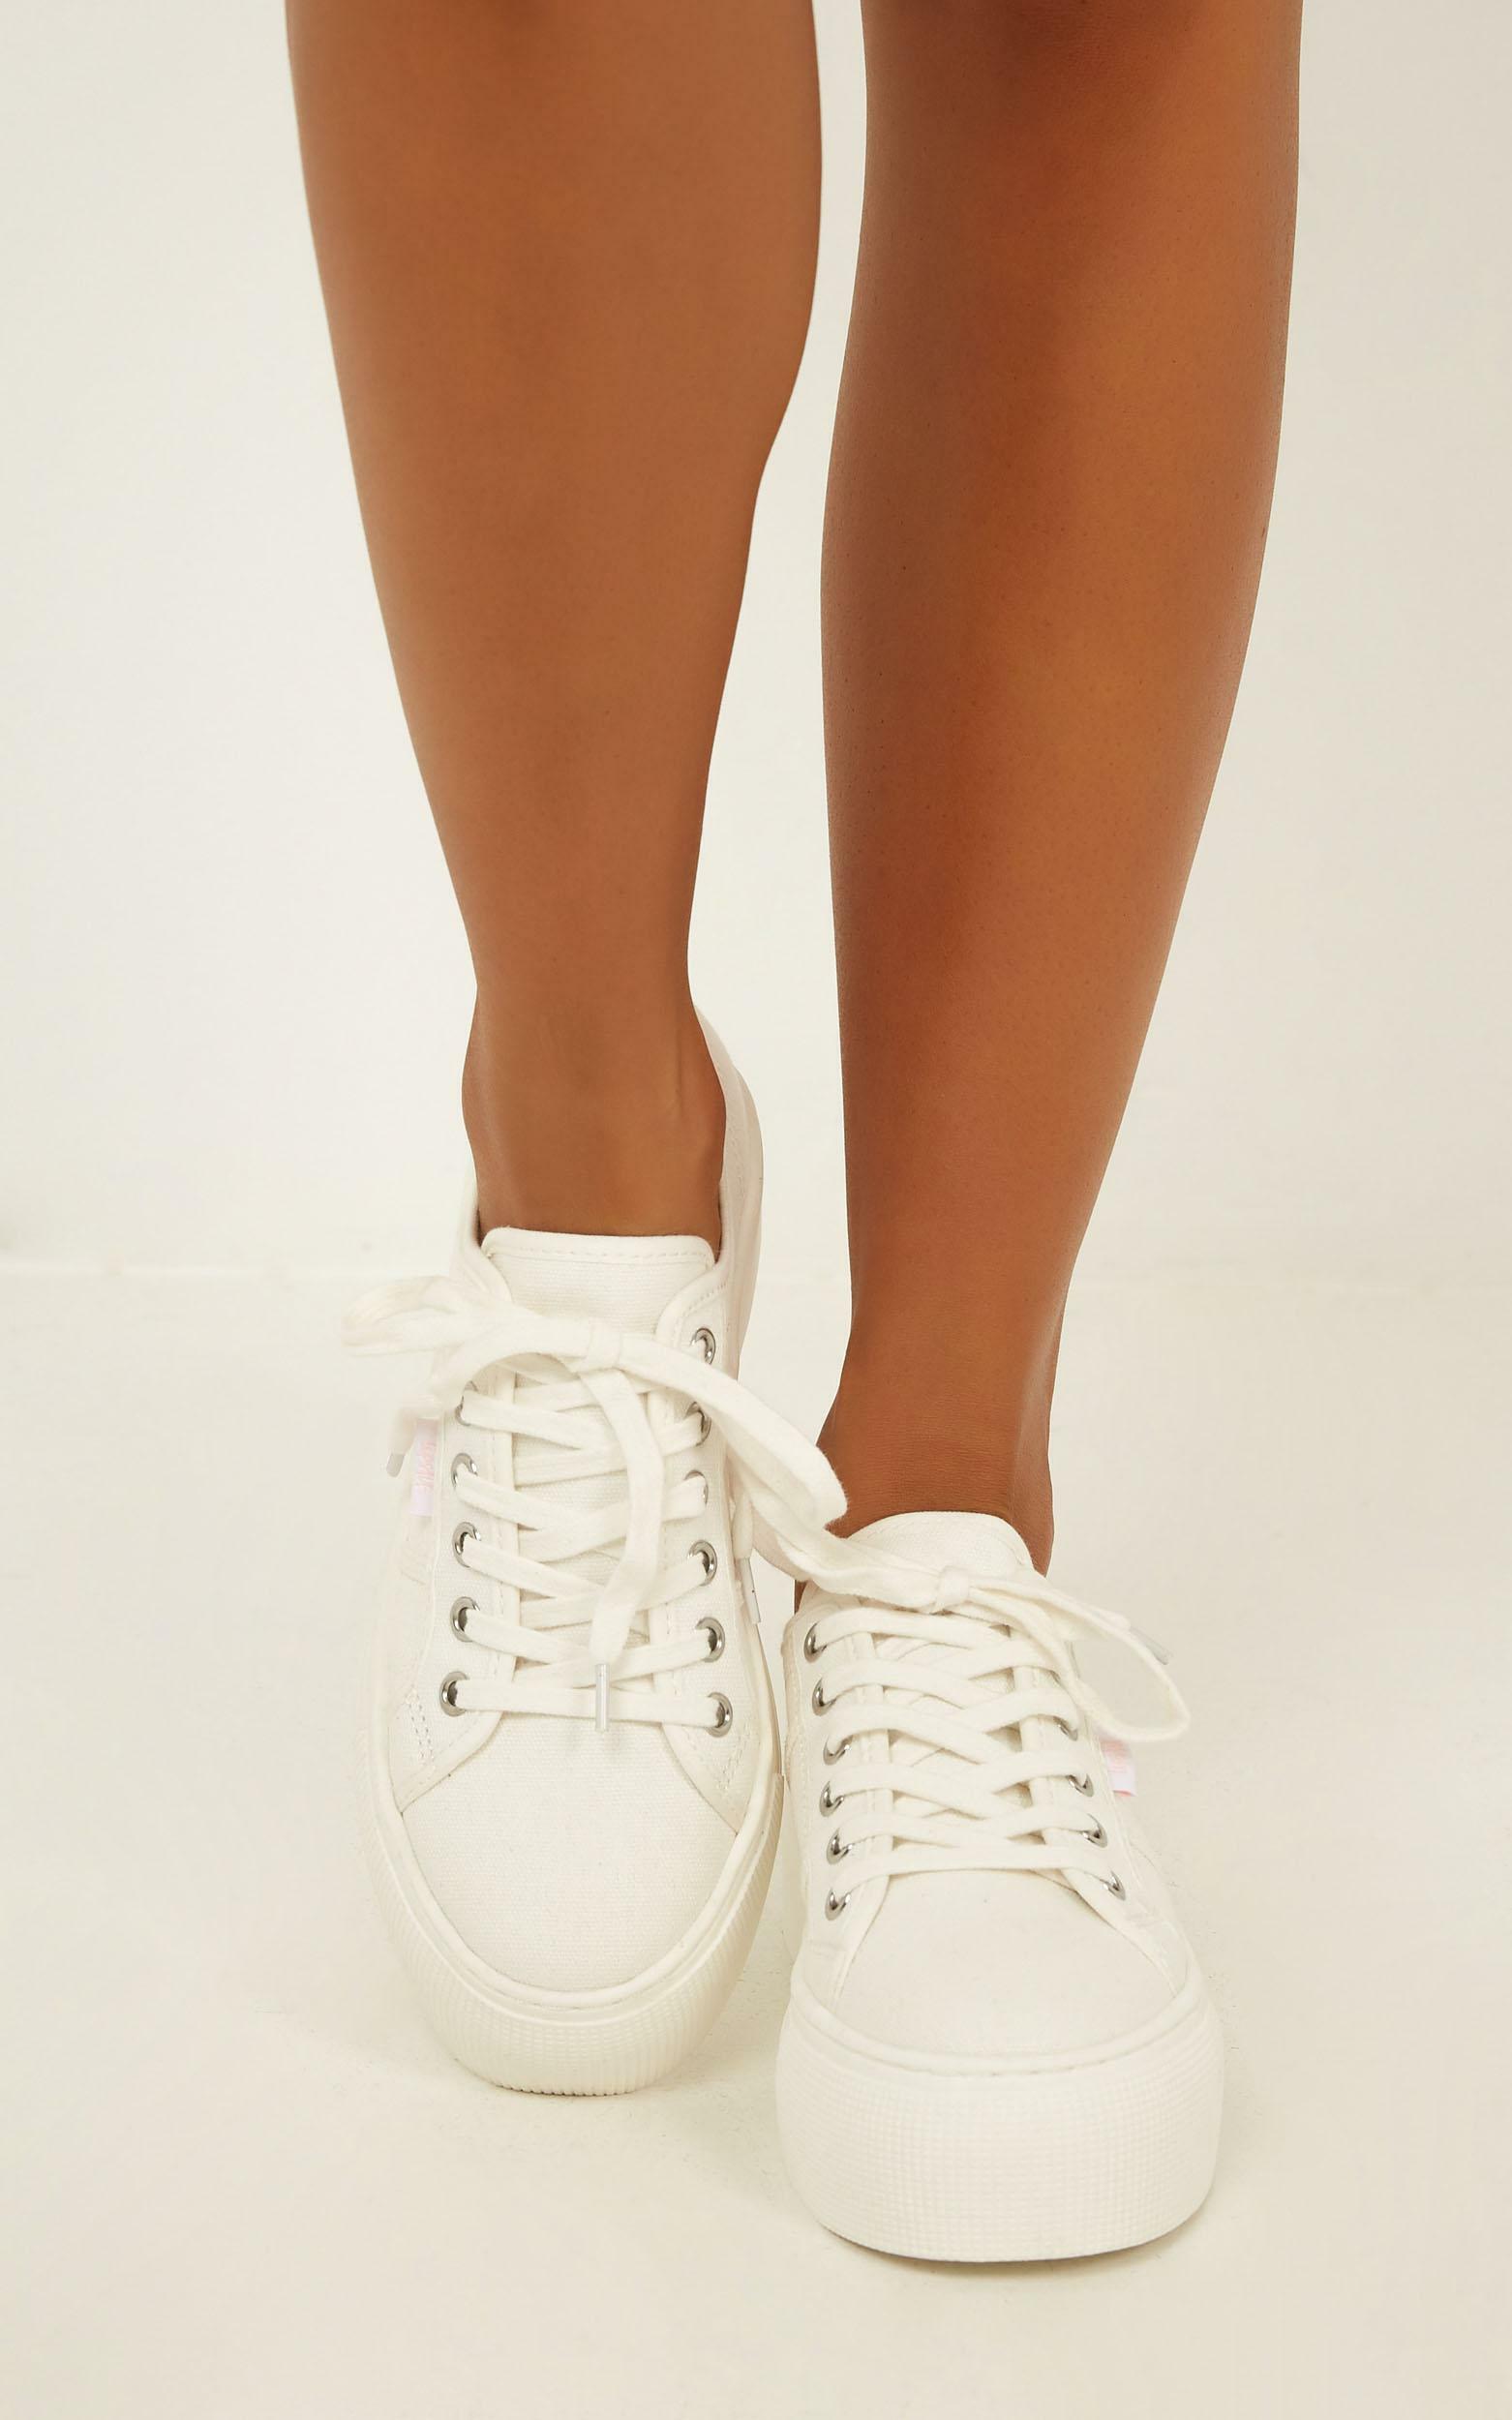 Lipstik - Rayden sneaker in white canvas - 10, White, hi-res image number null